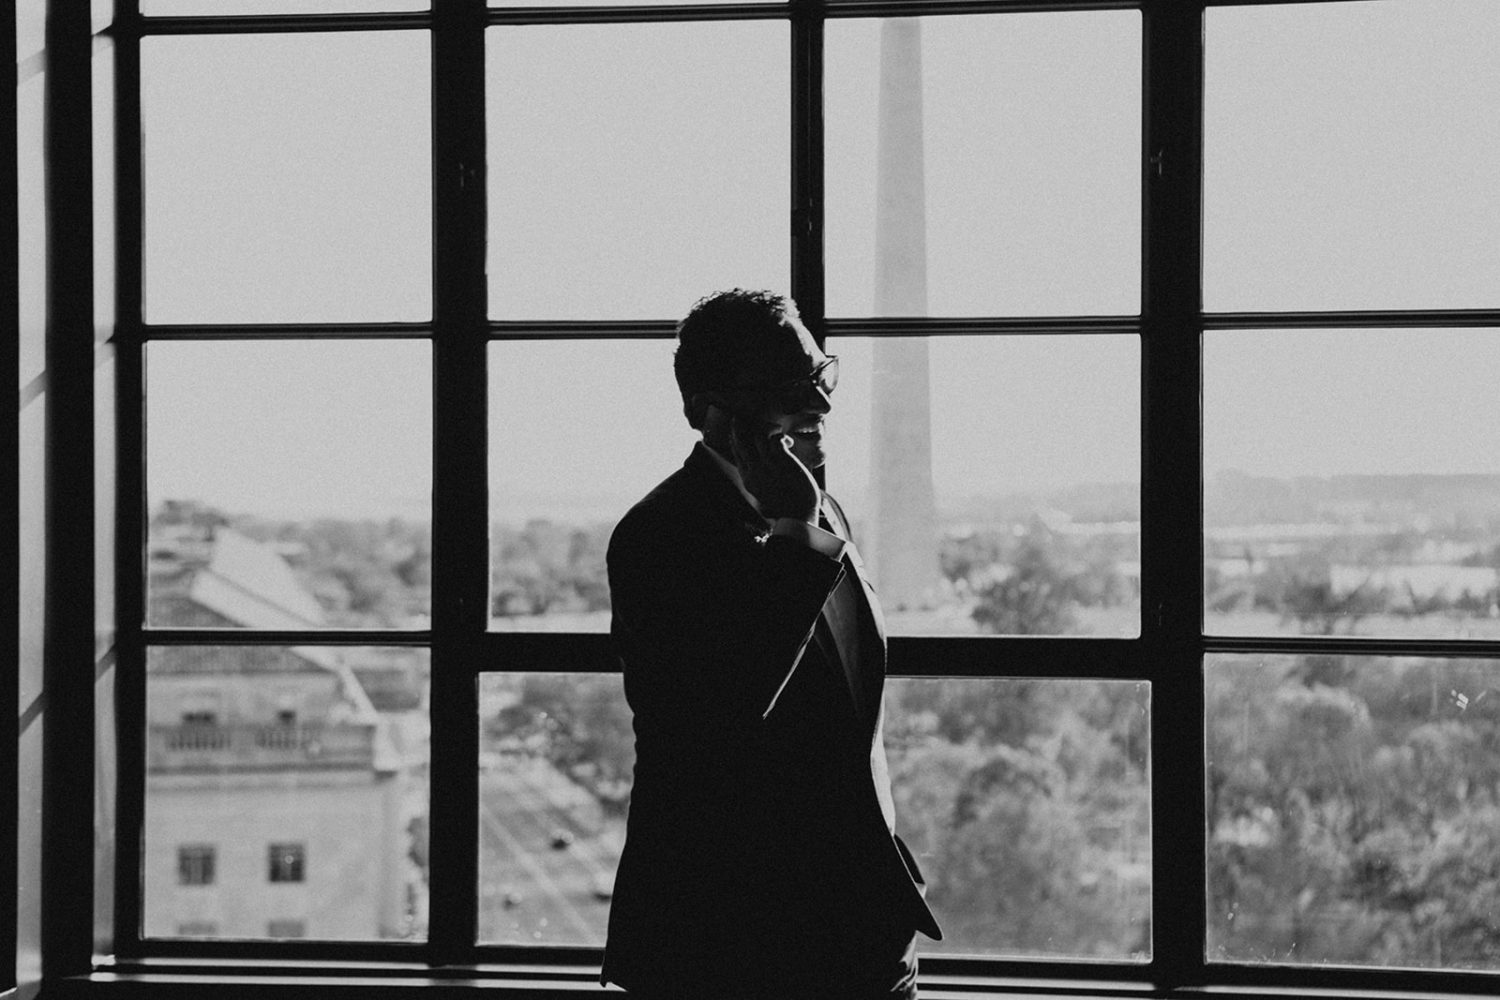 Groom chats on phone while in front of window onlooking the Washington Monument